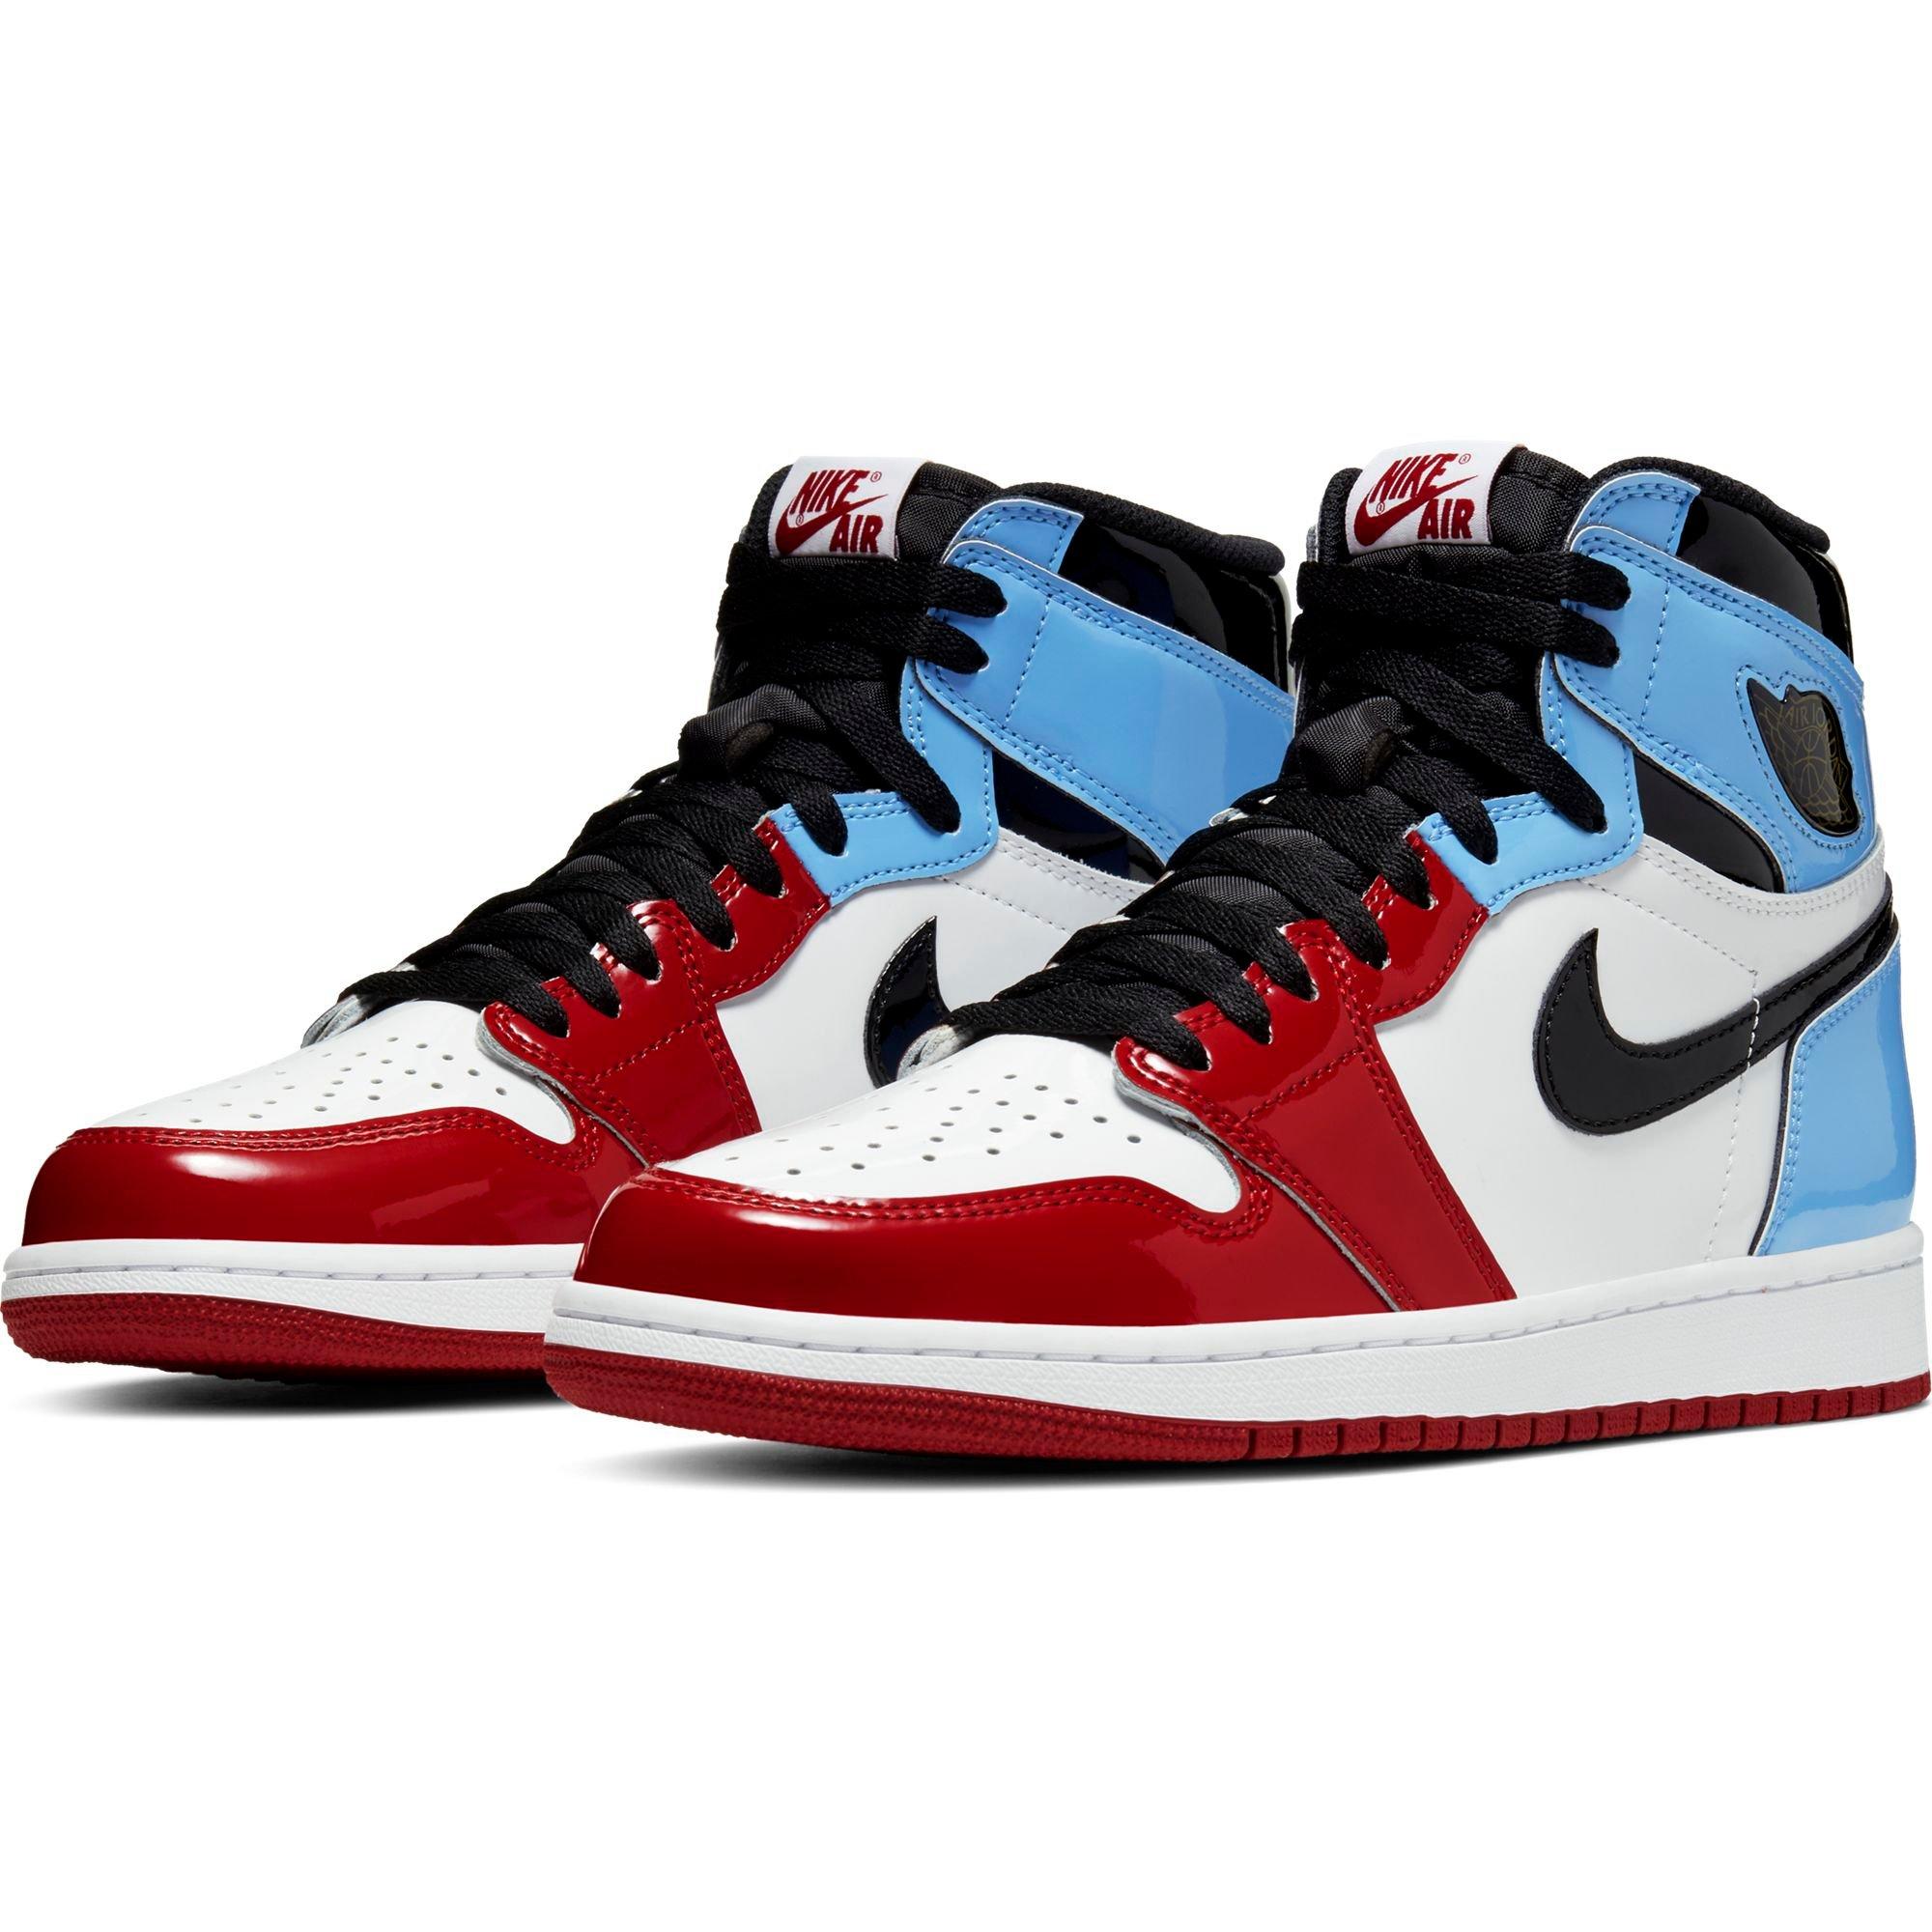 1s red and blue